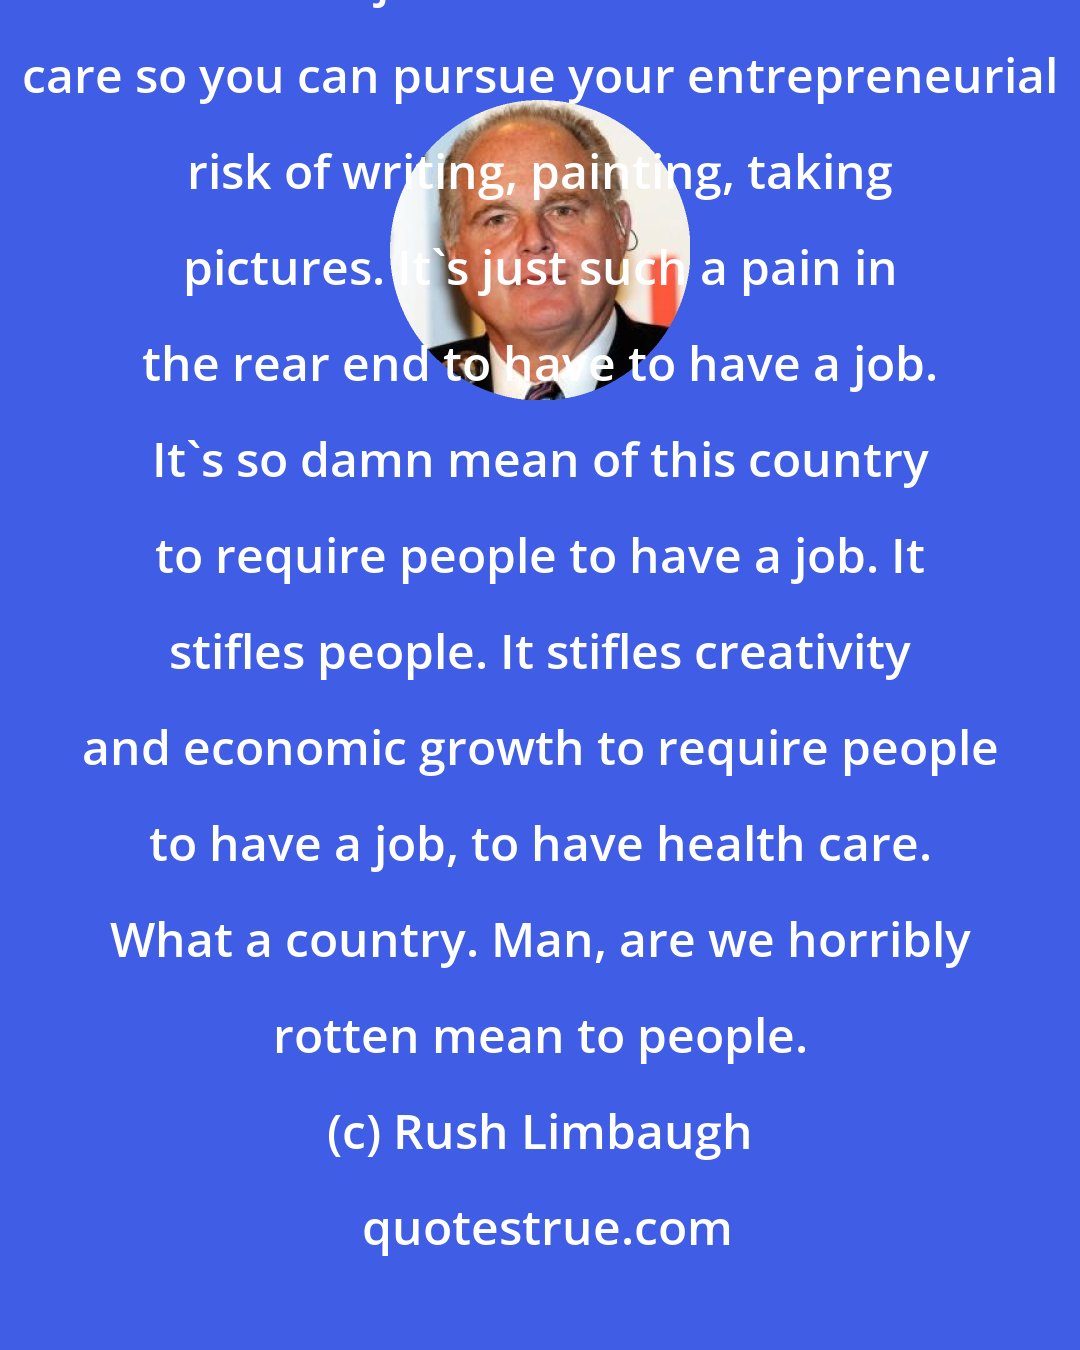 Rush Limbaugh: This is what the Democrats are fighting for. They're fighting for you not to have a job and still have health care so you can pursue your entrepreneurial risk of writing, painting, taking pictures. It's just such a pain in the rear end to have to have a job. It's so damn mean of this country to require people to have a job. It stifles people. It stifles creativity and economic growth to require people to have a job, to have health care. What a country. Man, are we horribly rotten mean to people.